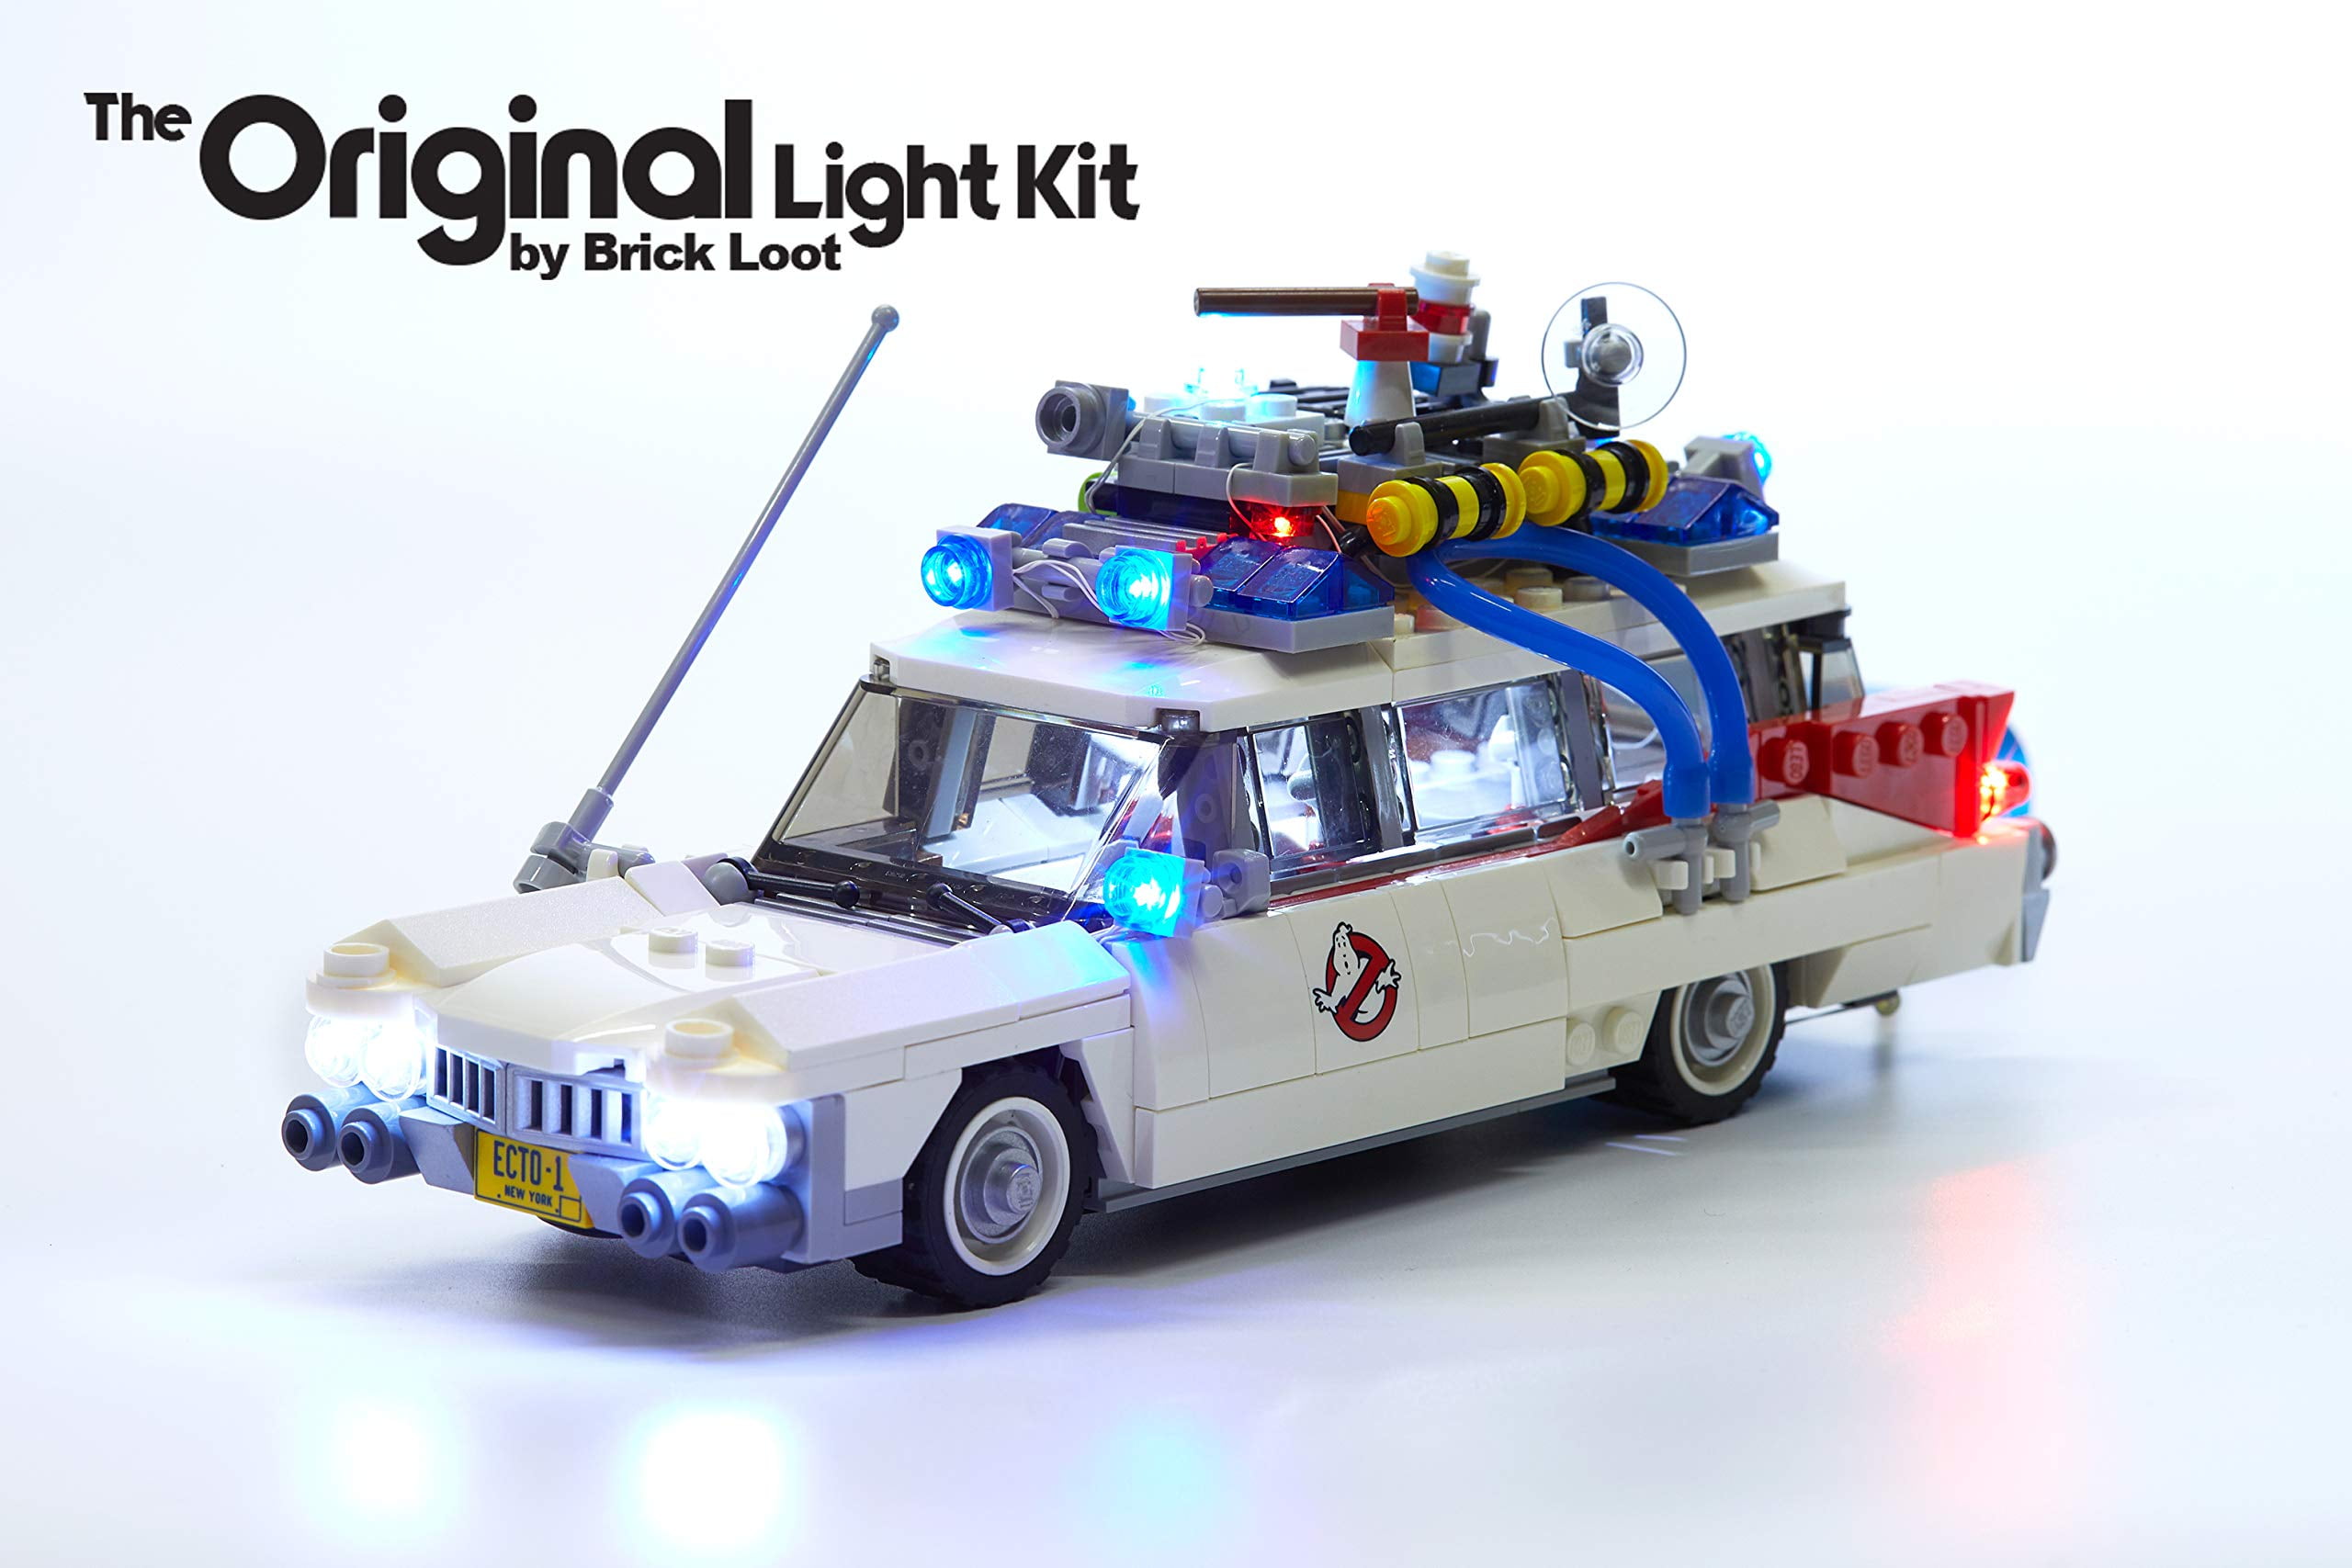 Lighting Kit for Your Lego Ghostbusters Ecto-1 21108 (Lego Set / Car Not Included) Light Up by Brick Loot Walmart.com